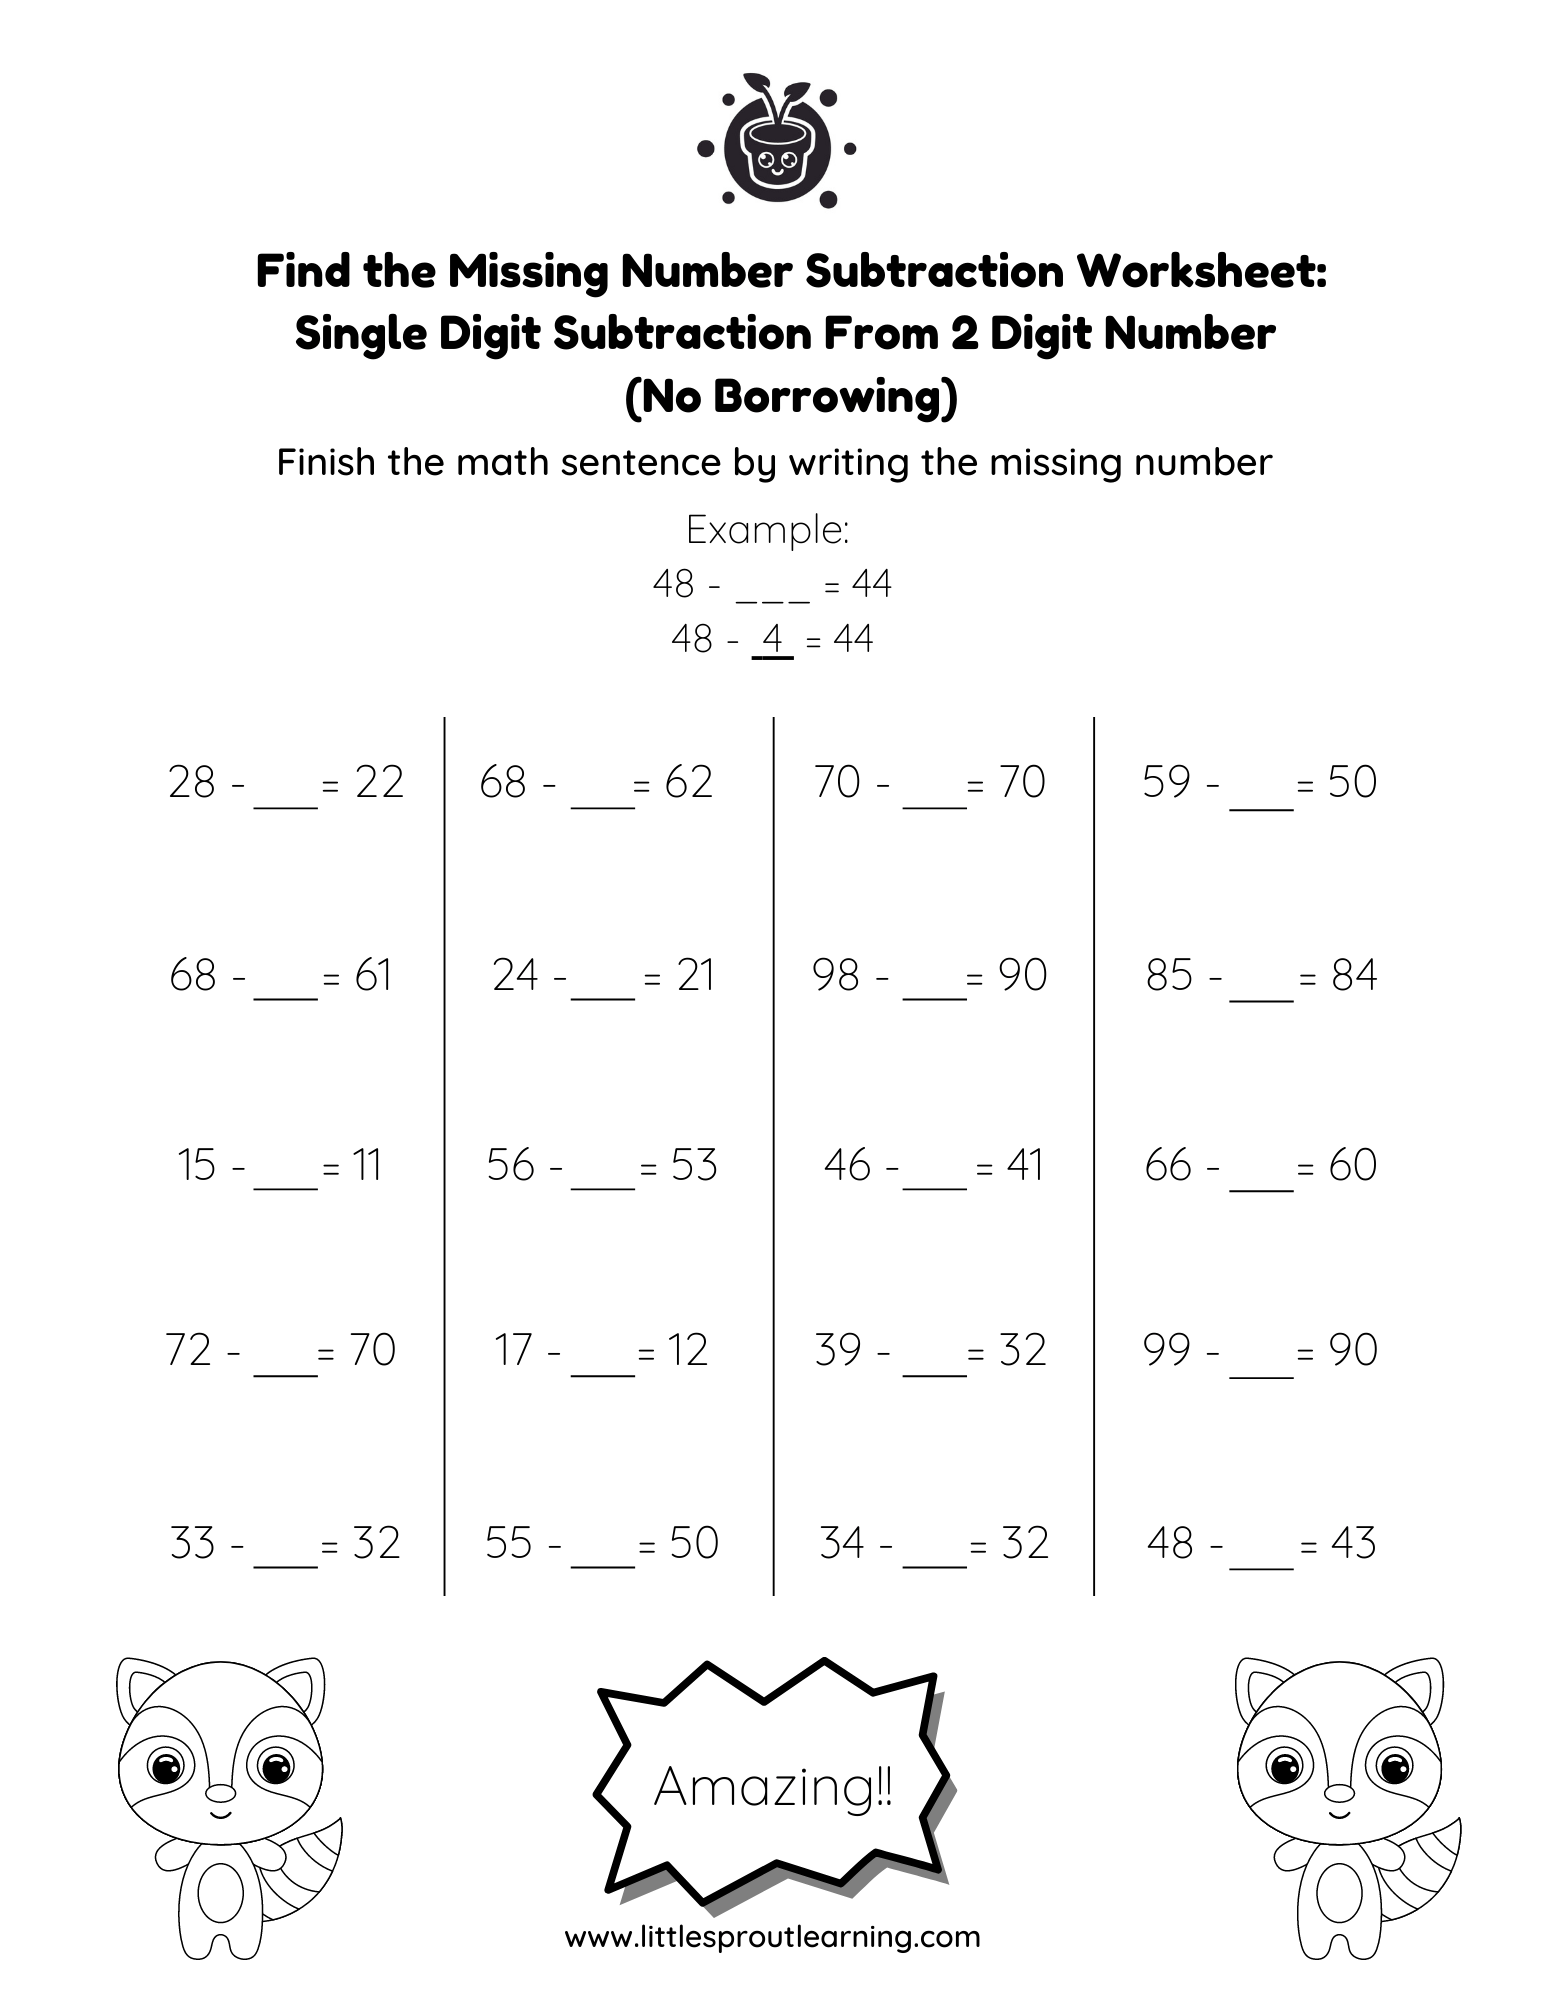 Find the Missing Number Single Digit Subtraction From 2 Digit Numbers (No Borrowing) Worksheet